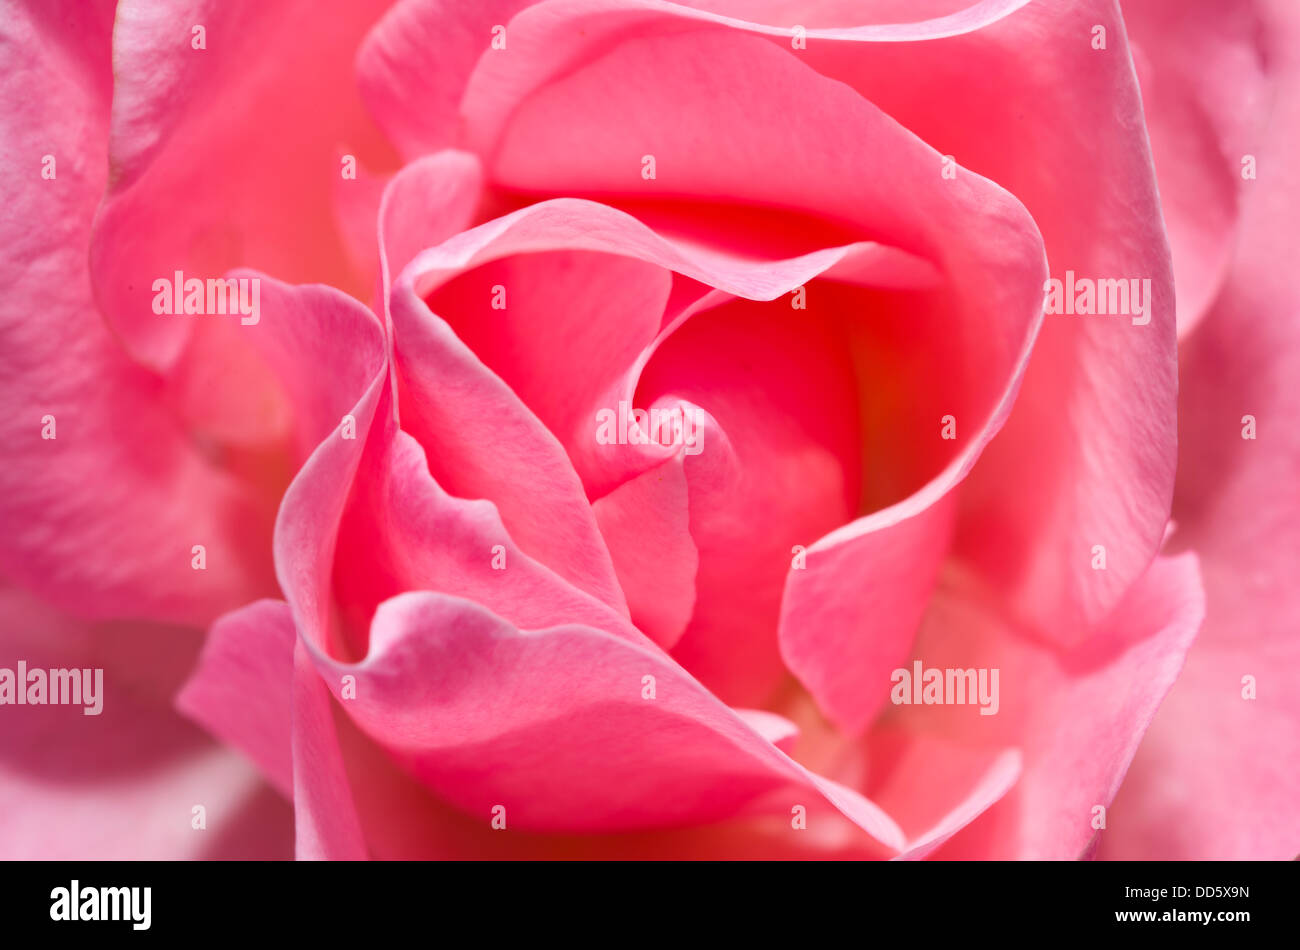 Roes closeup, flower, pink, scent, petals, beauty, gift, giving, mothers day, birthday, spring, summer, gardening, hobbies Stock Photo